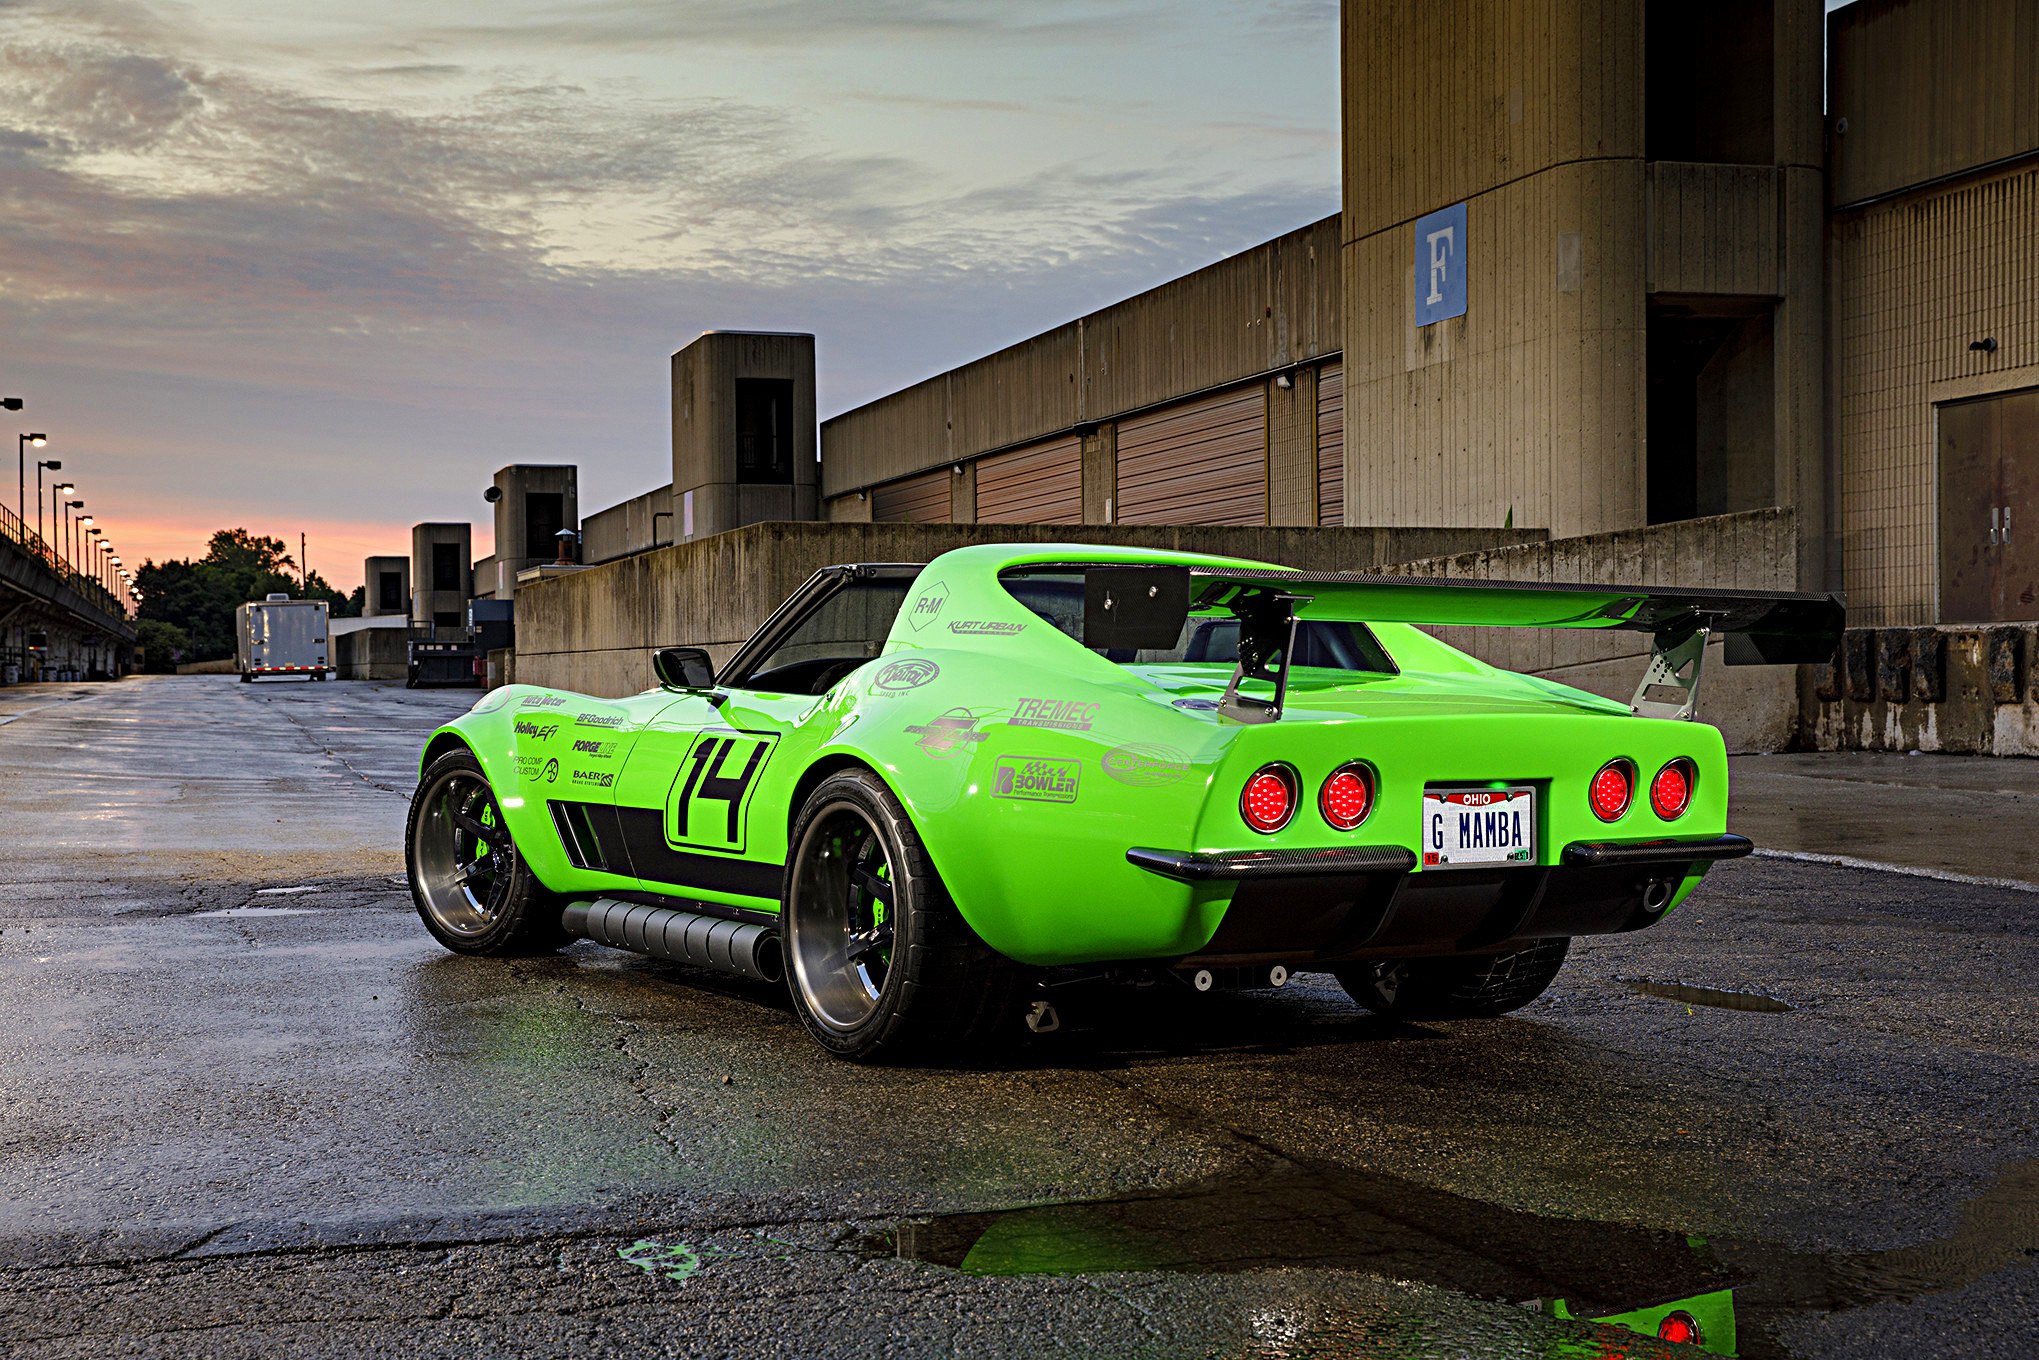 Large Wing Spoiler on Green Debadged Chevy Corvette - Photo by Robert McGaffin